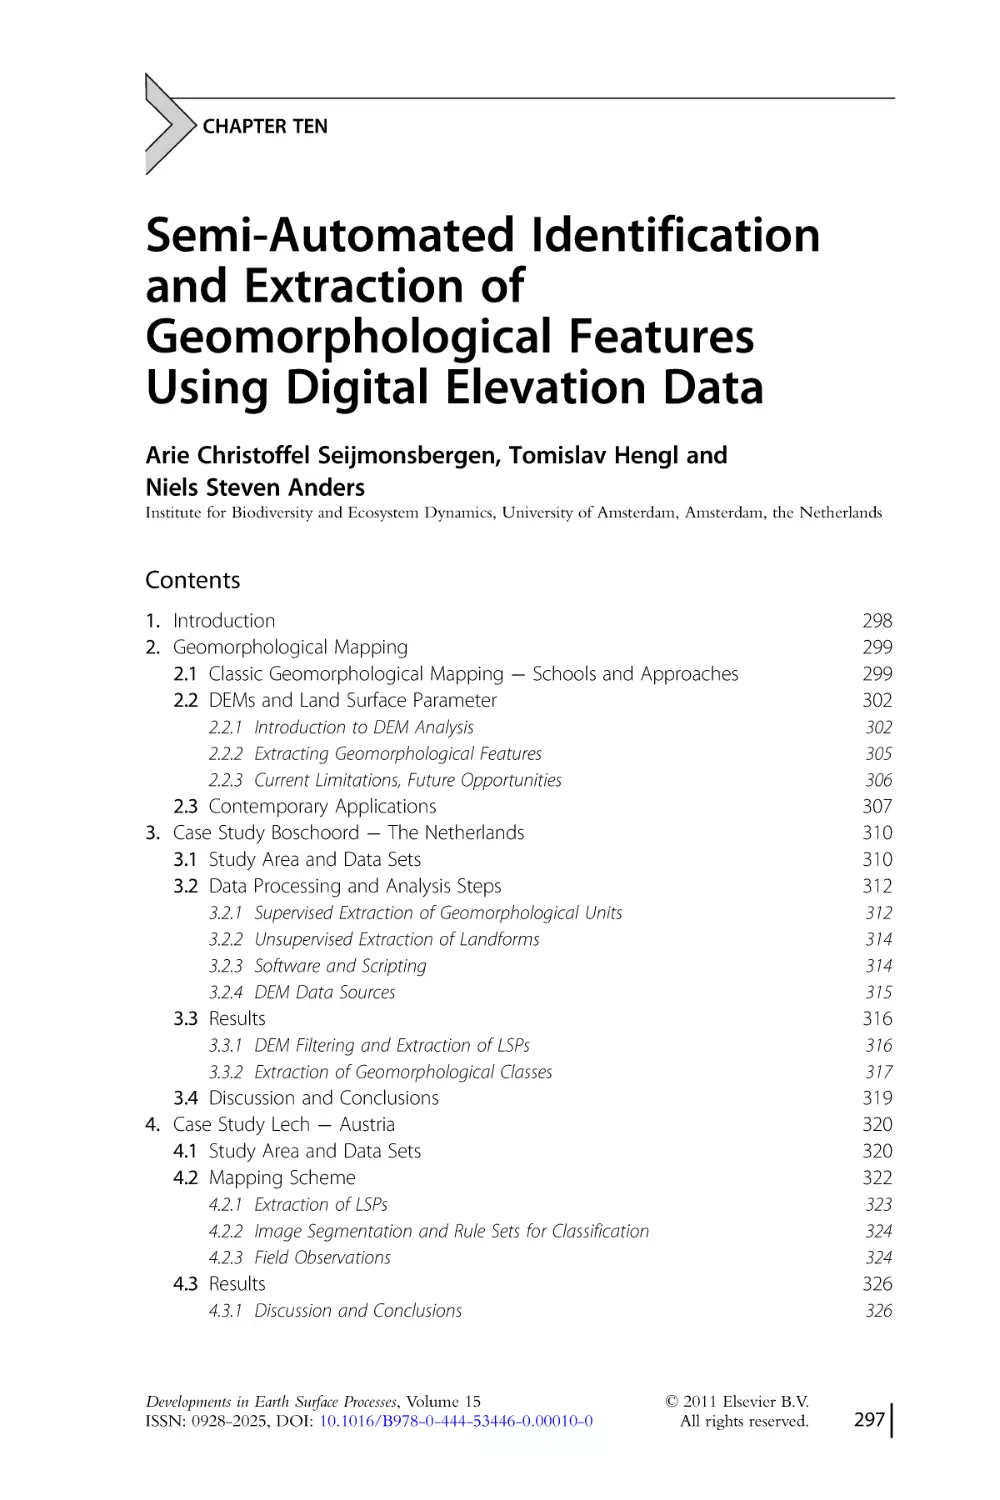 CHAPTER TEN.
Semi-Automated Identification
and Extraction of
Geomorphological Features
Using Digital Elevation Data